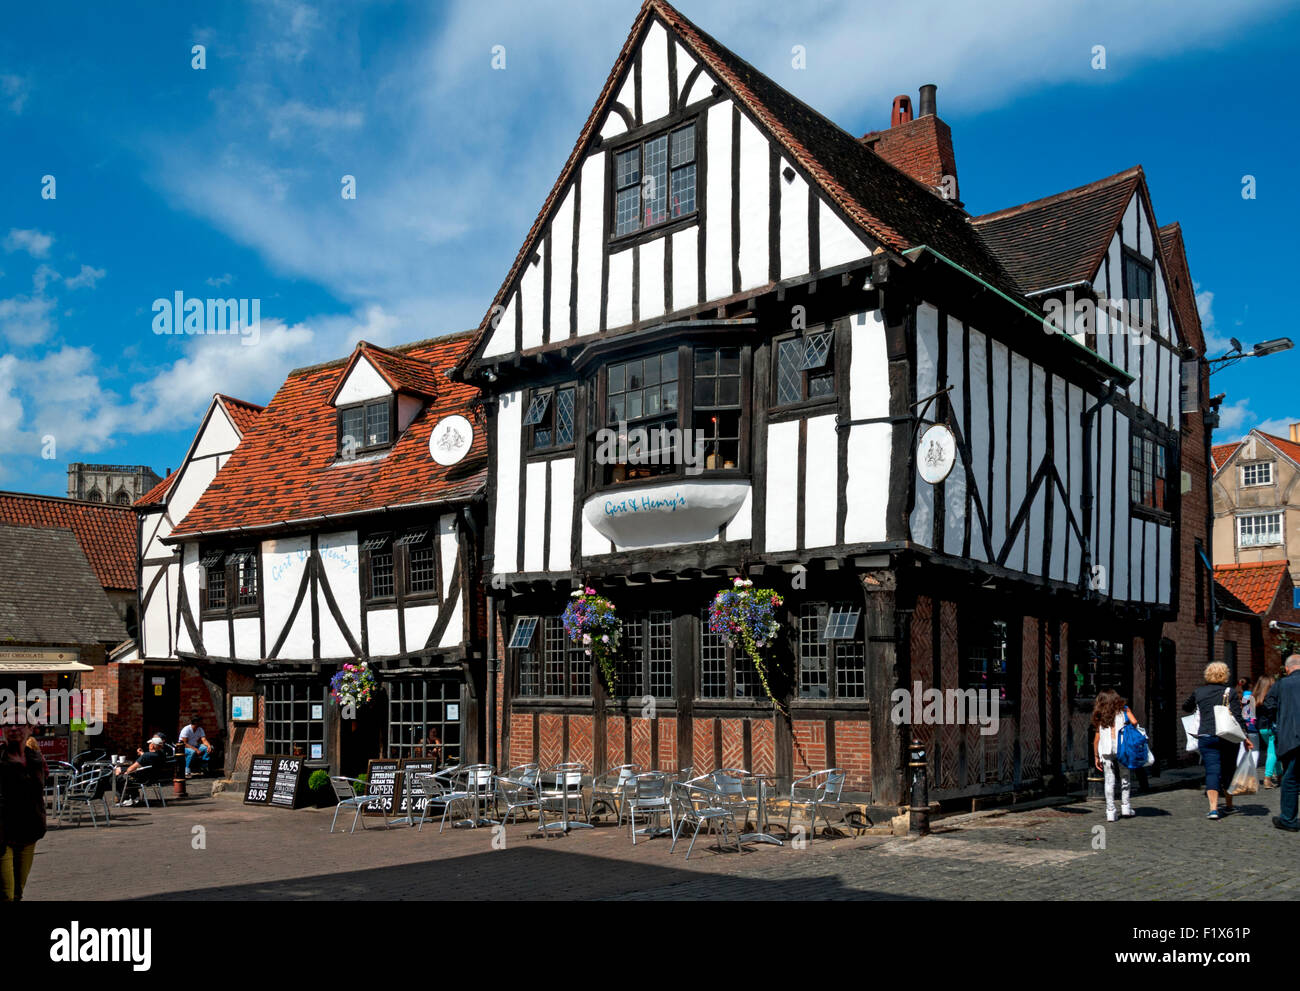 The 'Gert and Henry's' restaurant, Jubbergate, City of York, Yorkshire, England, UK. The building dates from the 17th century. Stock Photo